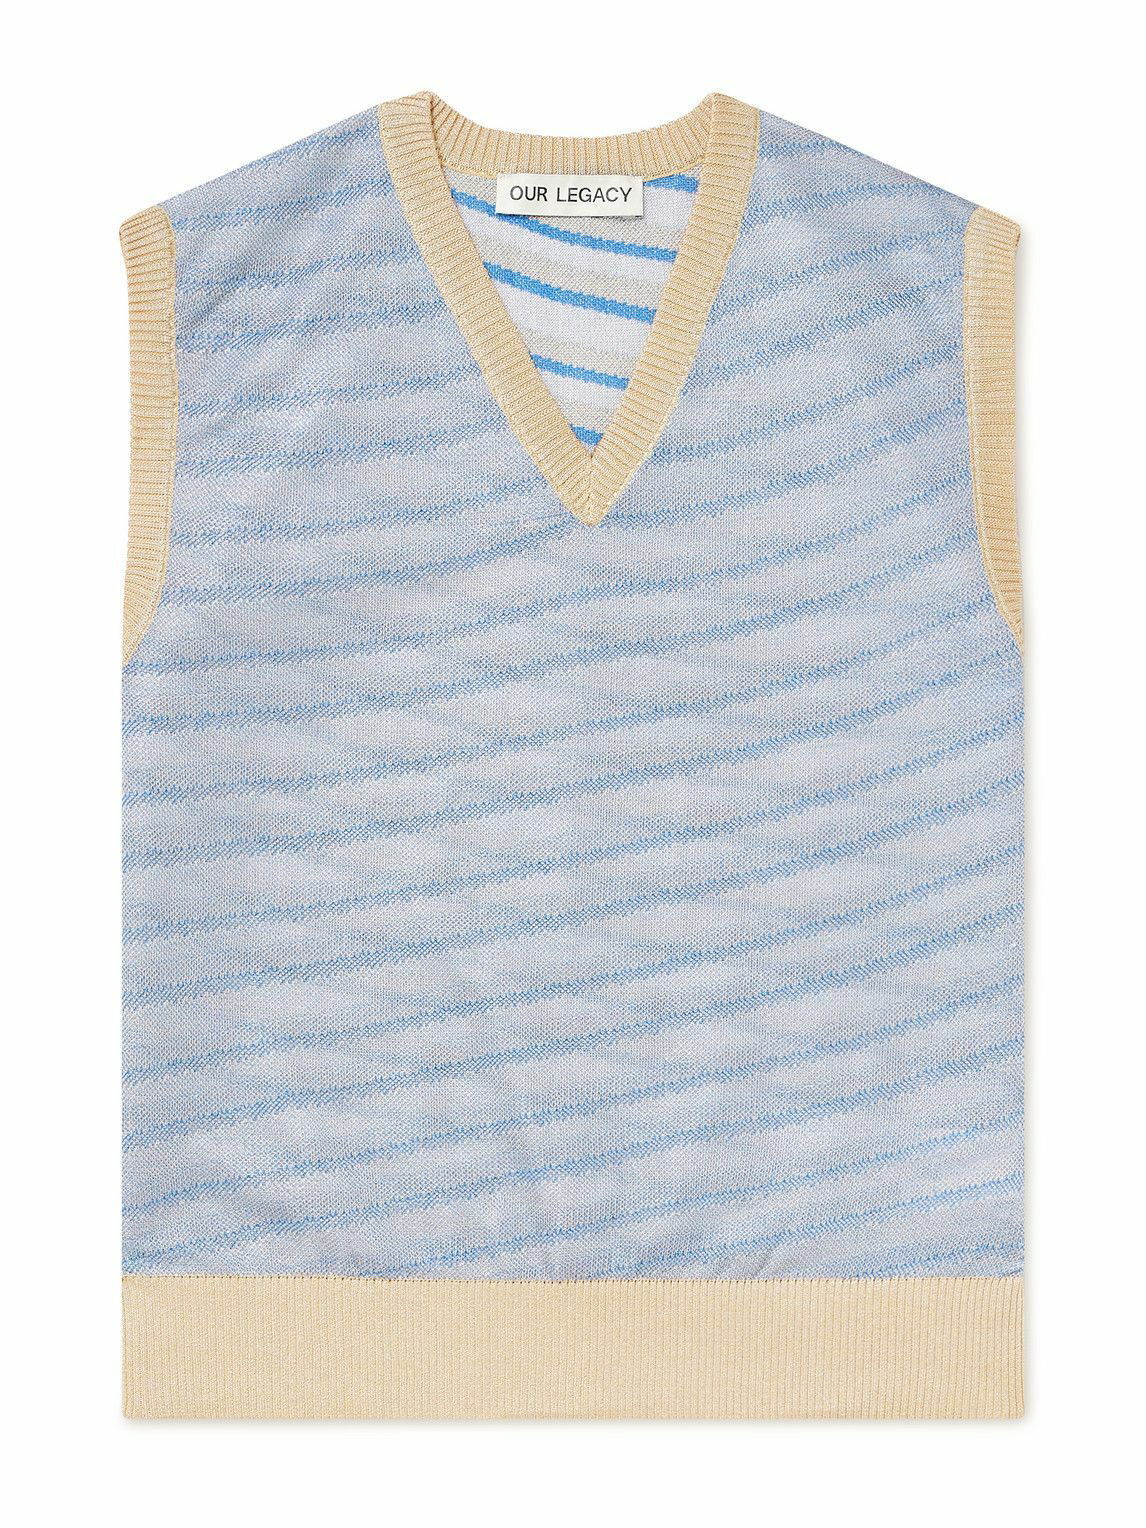 Our Legacy - Striped Knitted Sweater Vest - Blue Our Legacy